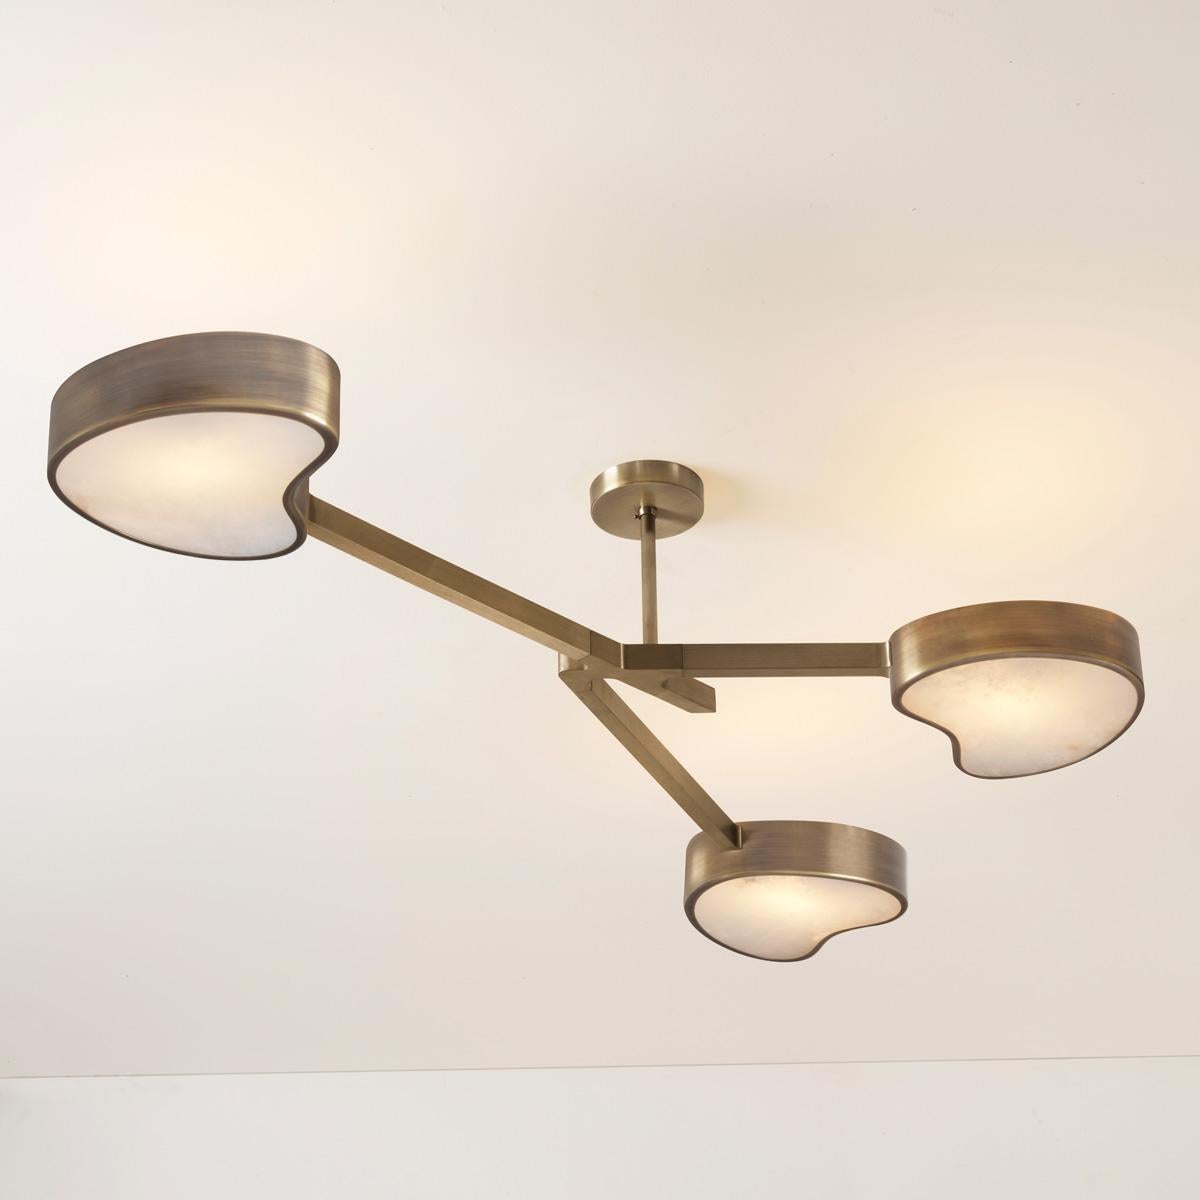 Cuore N.3 Ceiling Light by Gaspare Asaro. Peltro and Bronze Finish For Sale 5